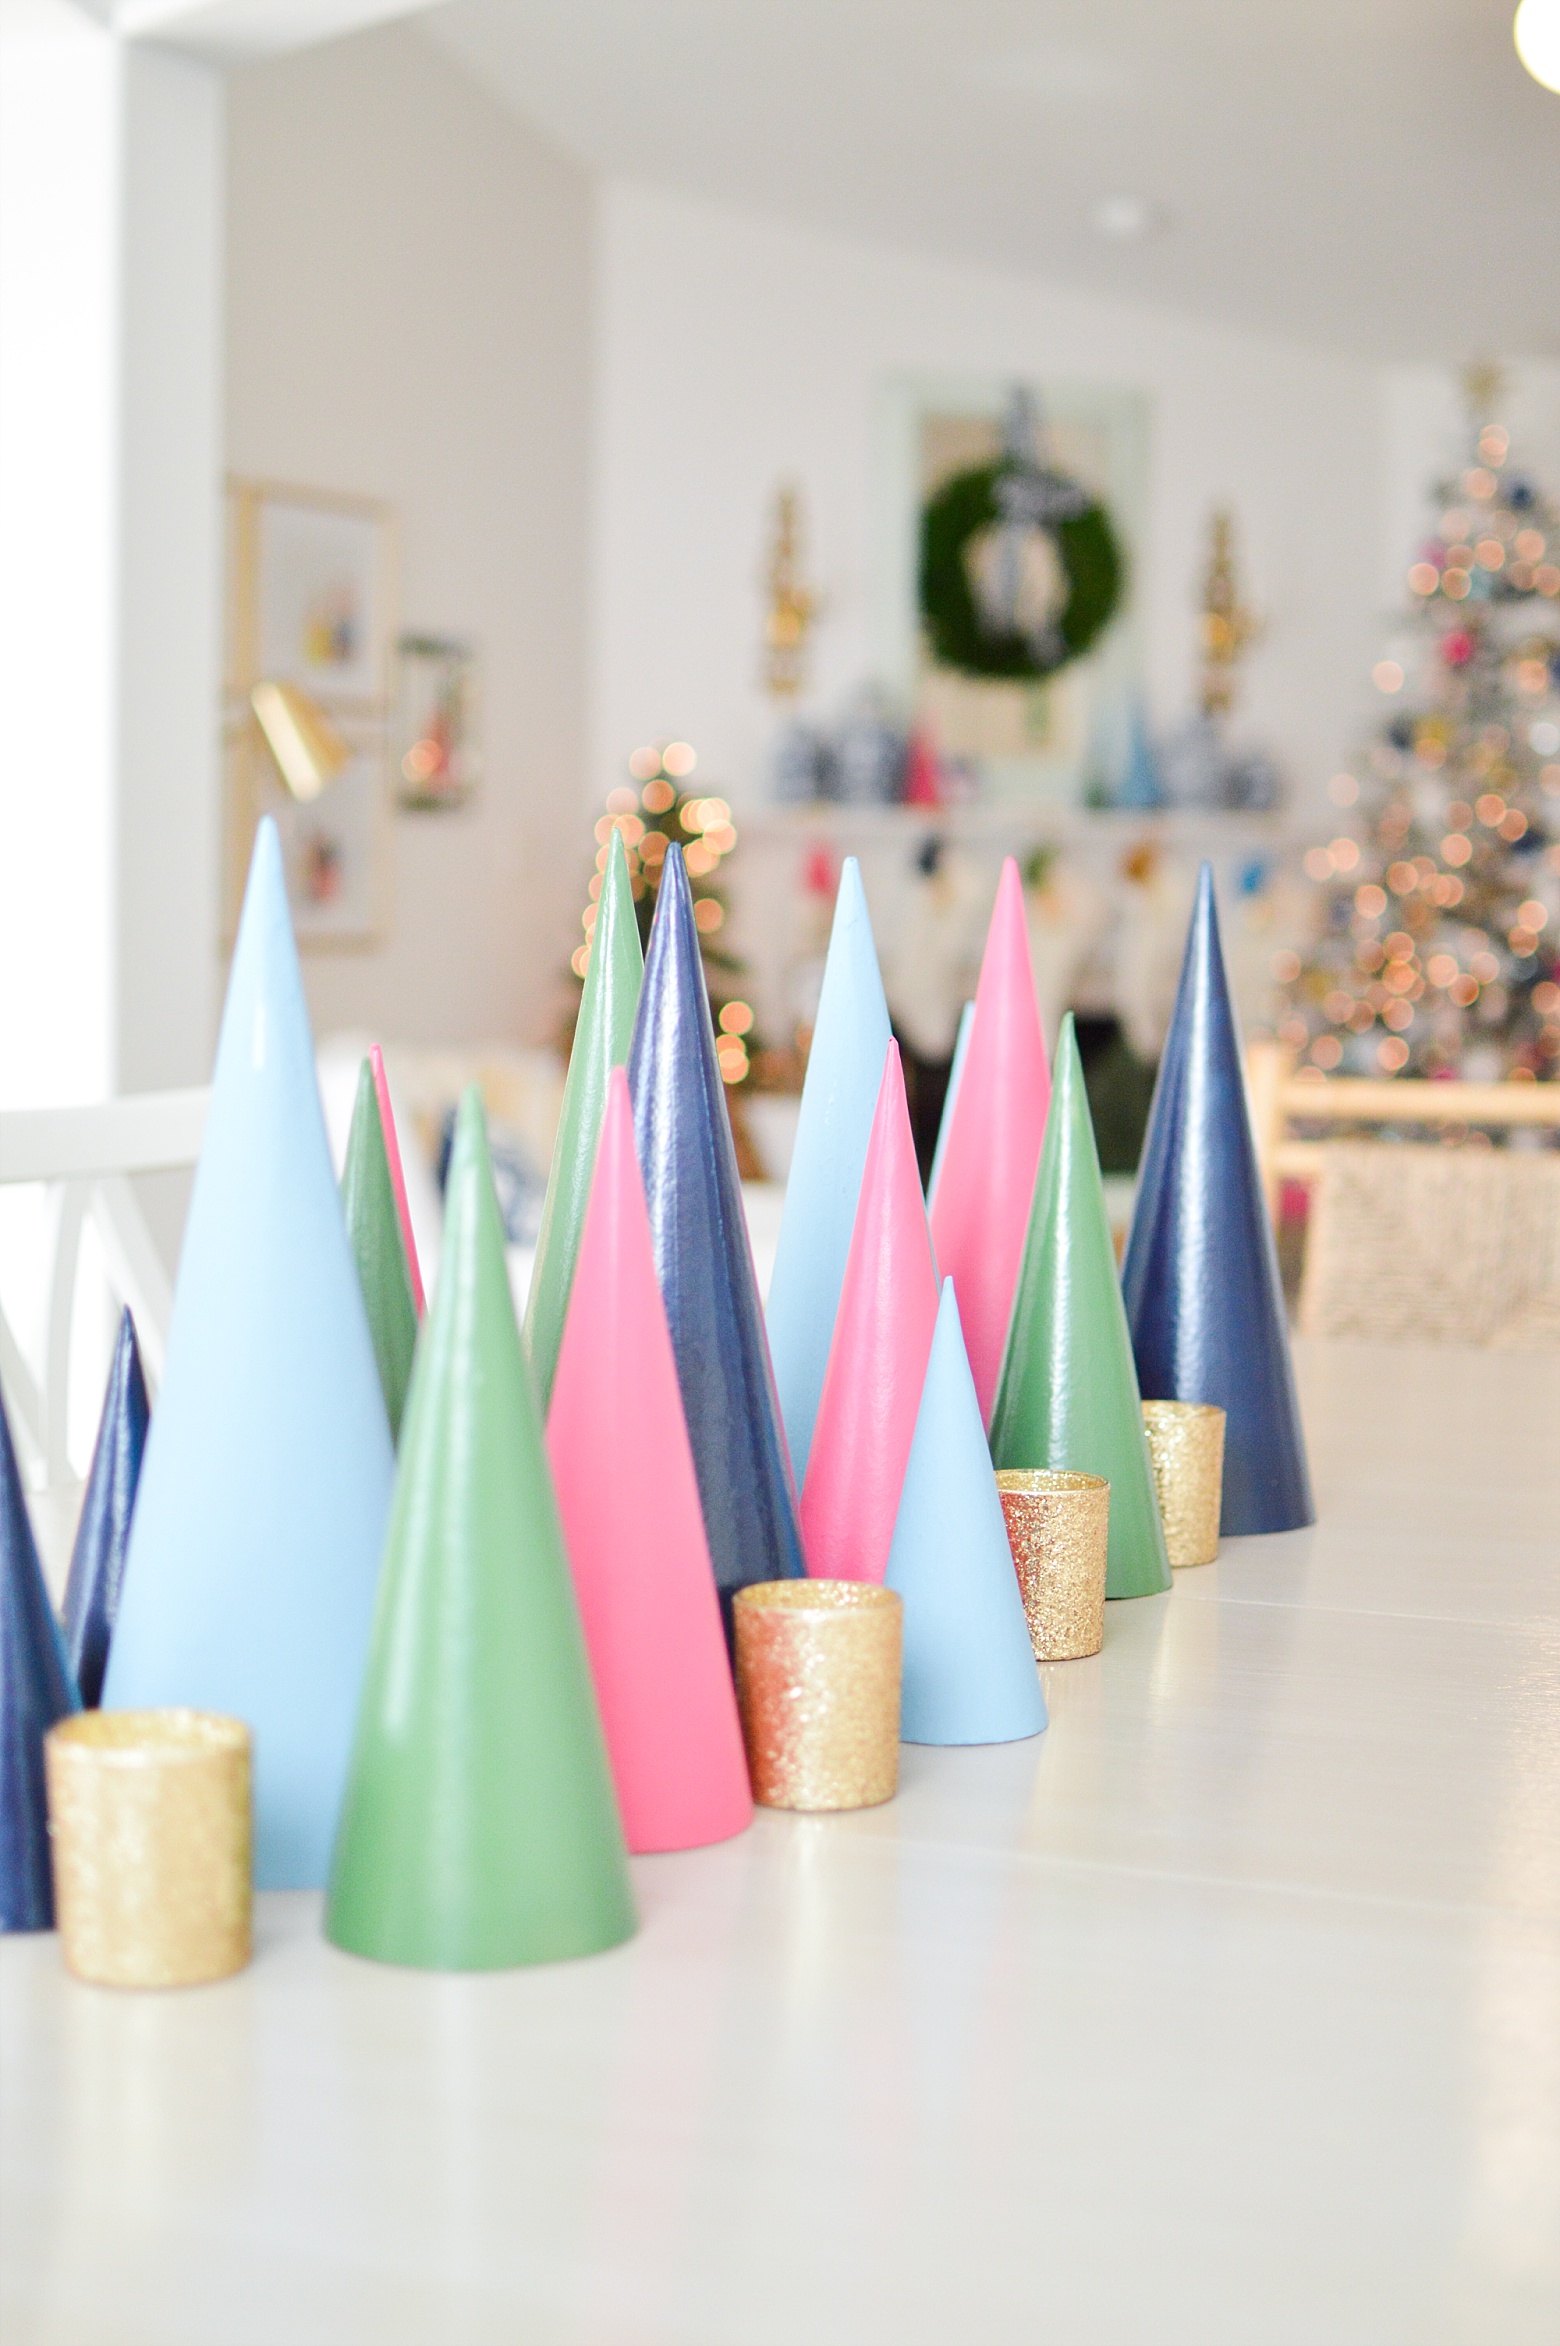 DIy painted Christmas trees table centerpiece, Modern Colorful Christmas home tour by Megan Martin Creative, holiday decorations, pink navy green gold